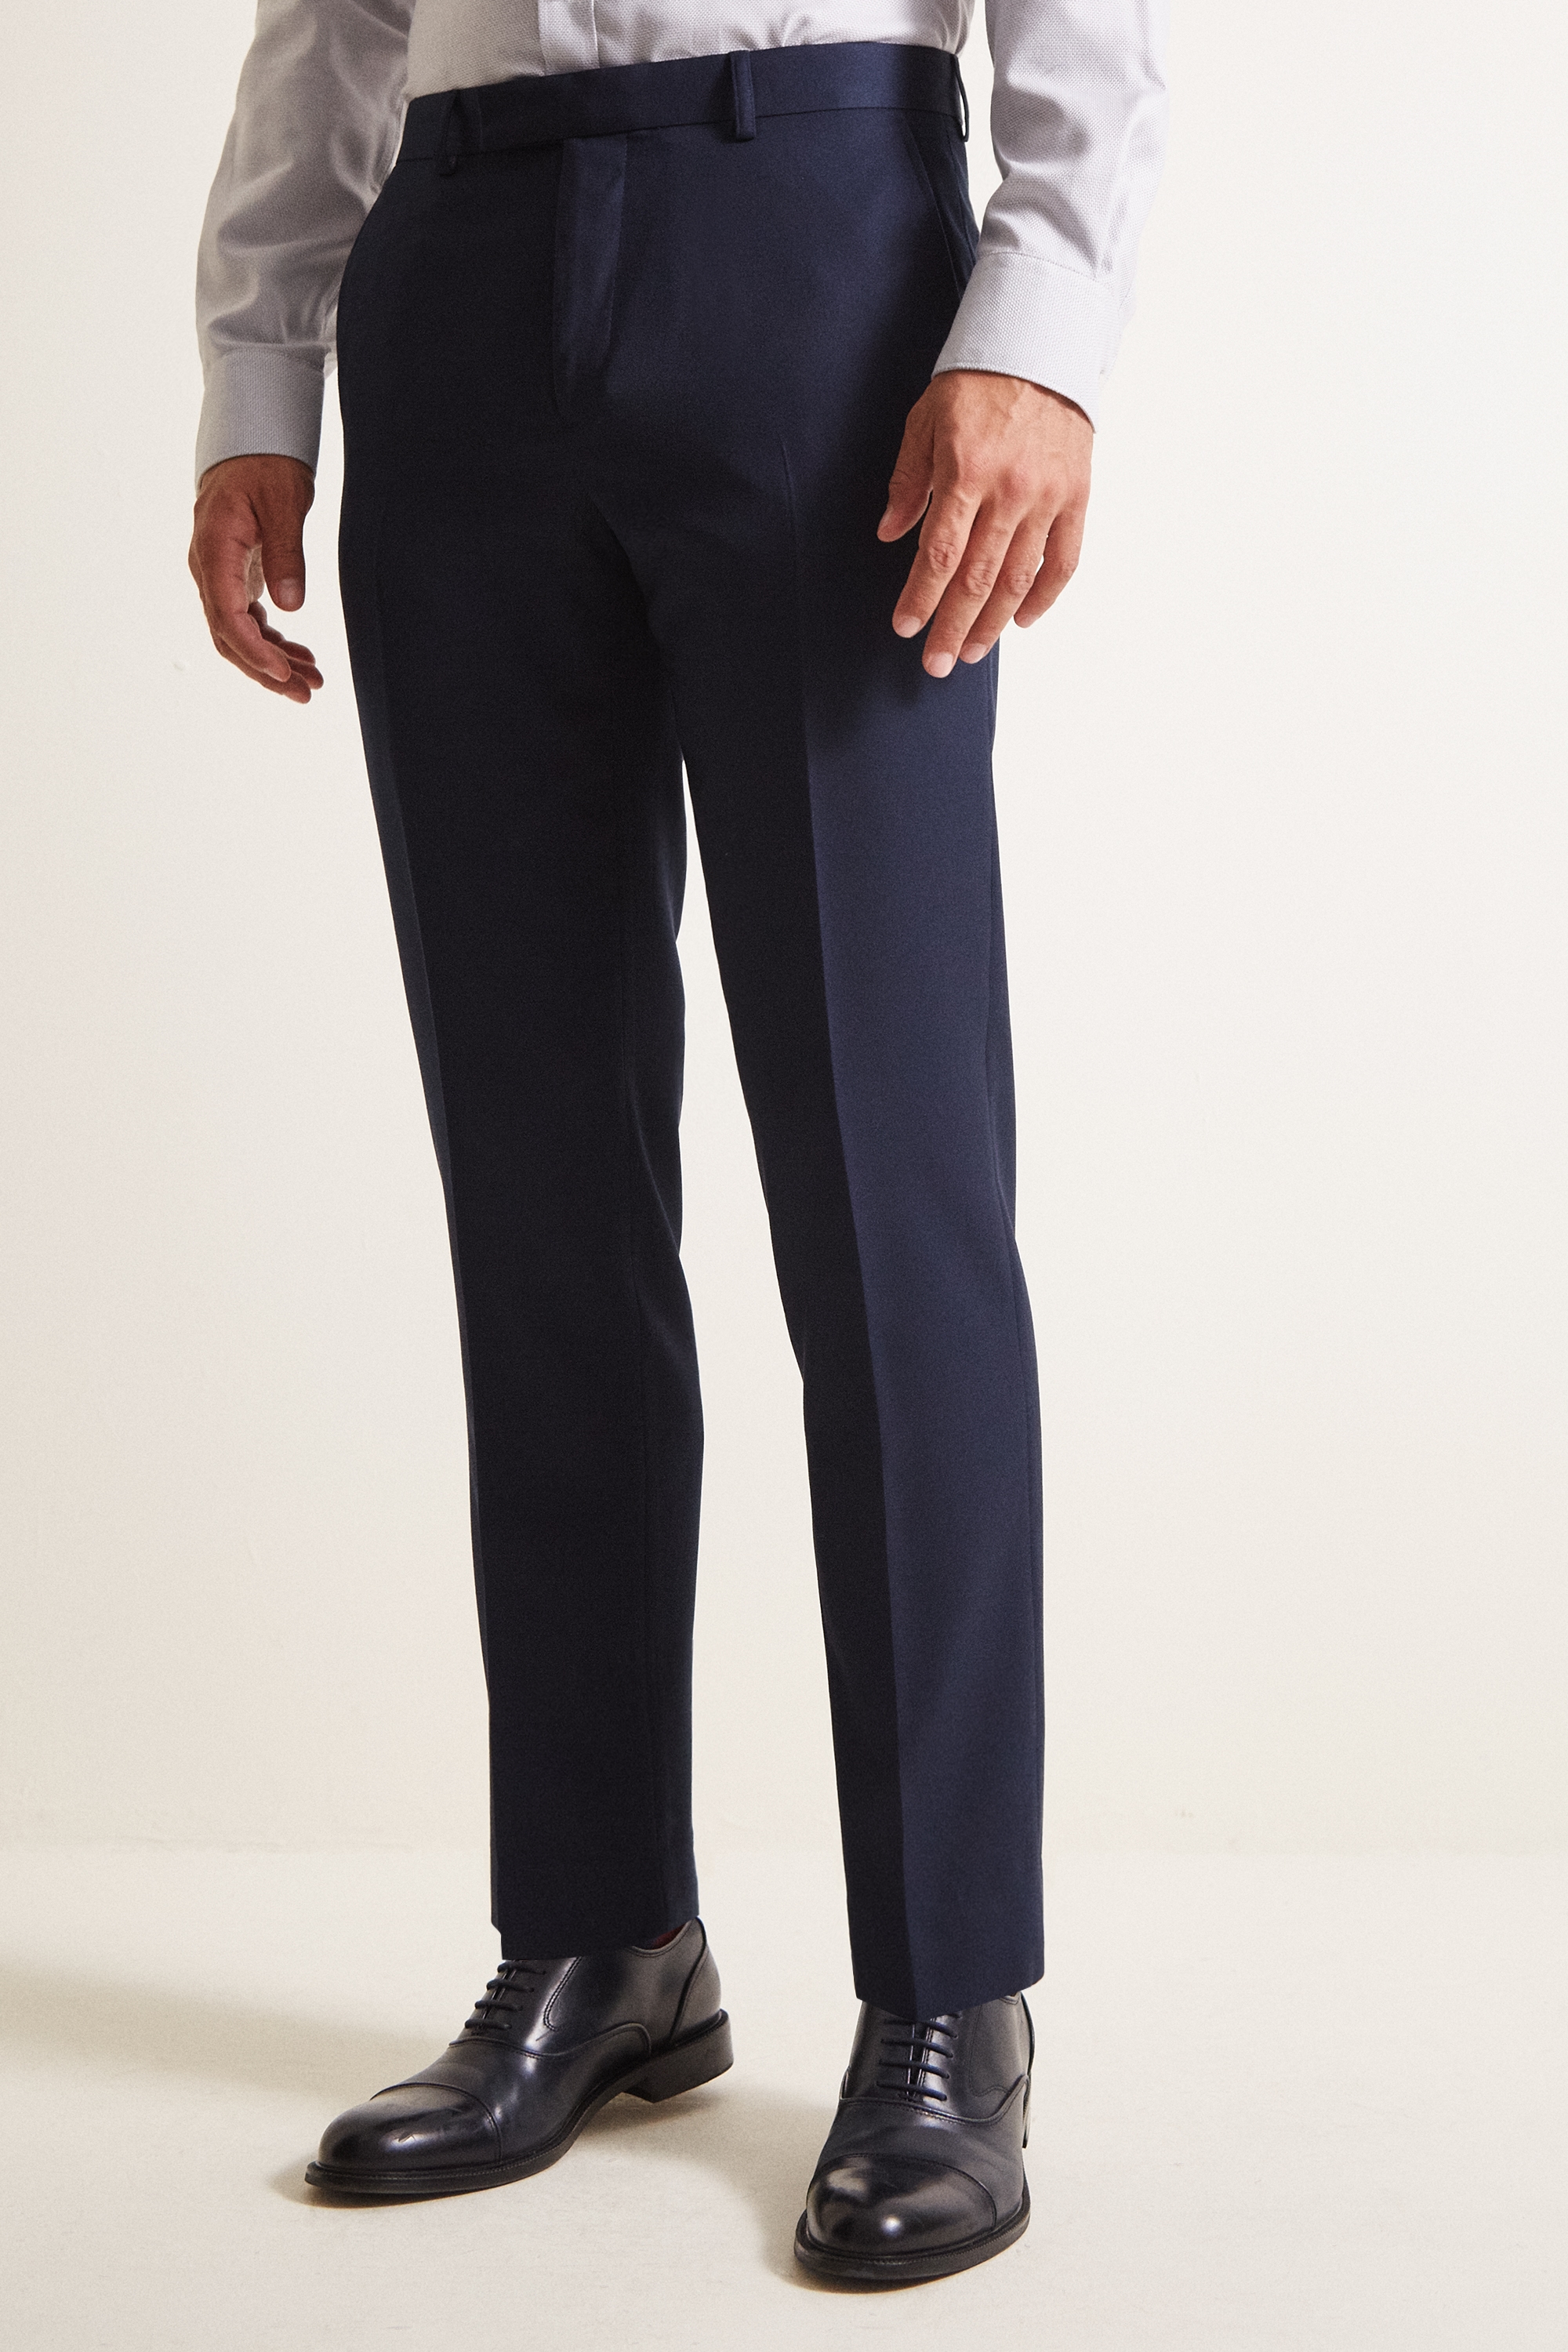 Moss 1851 Tailored Fit Blue Twill Trouser